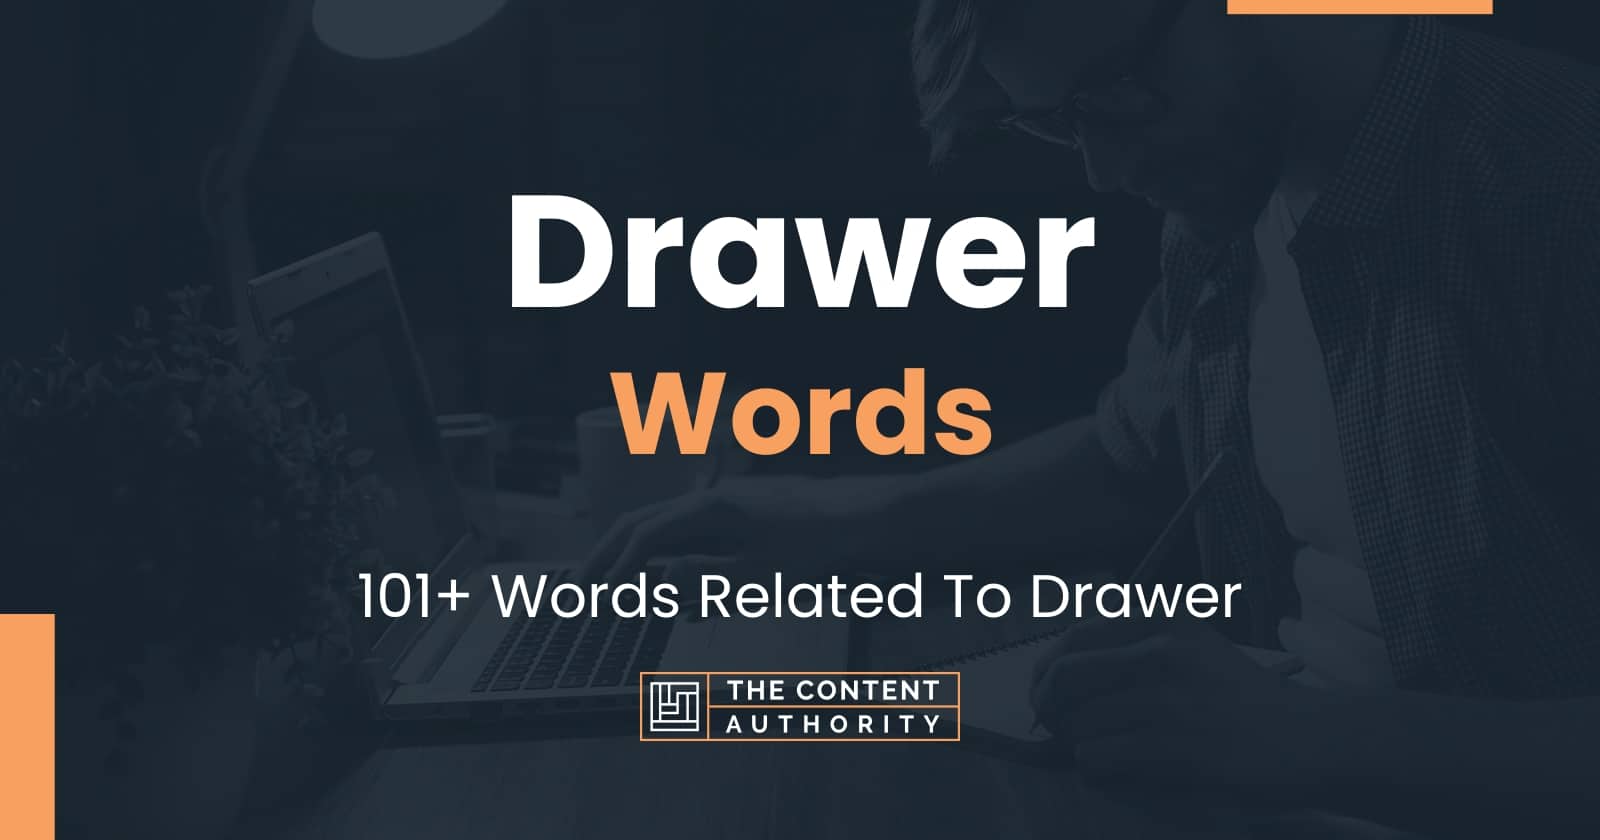 Drawer Words 101+ Words Related To Drawer